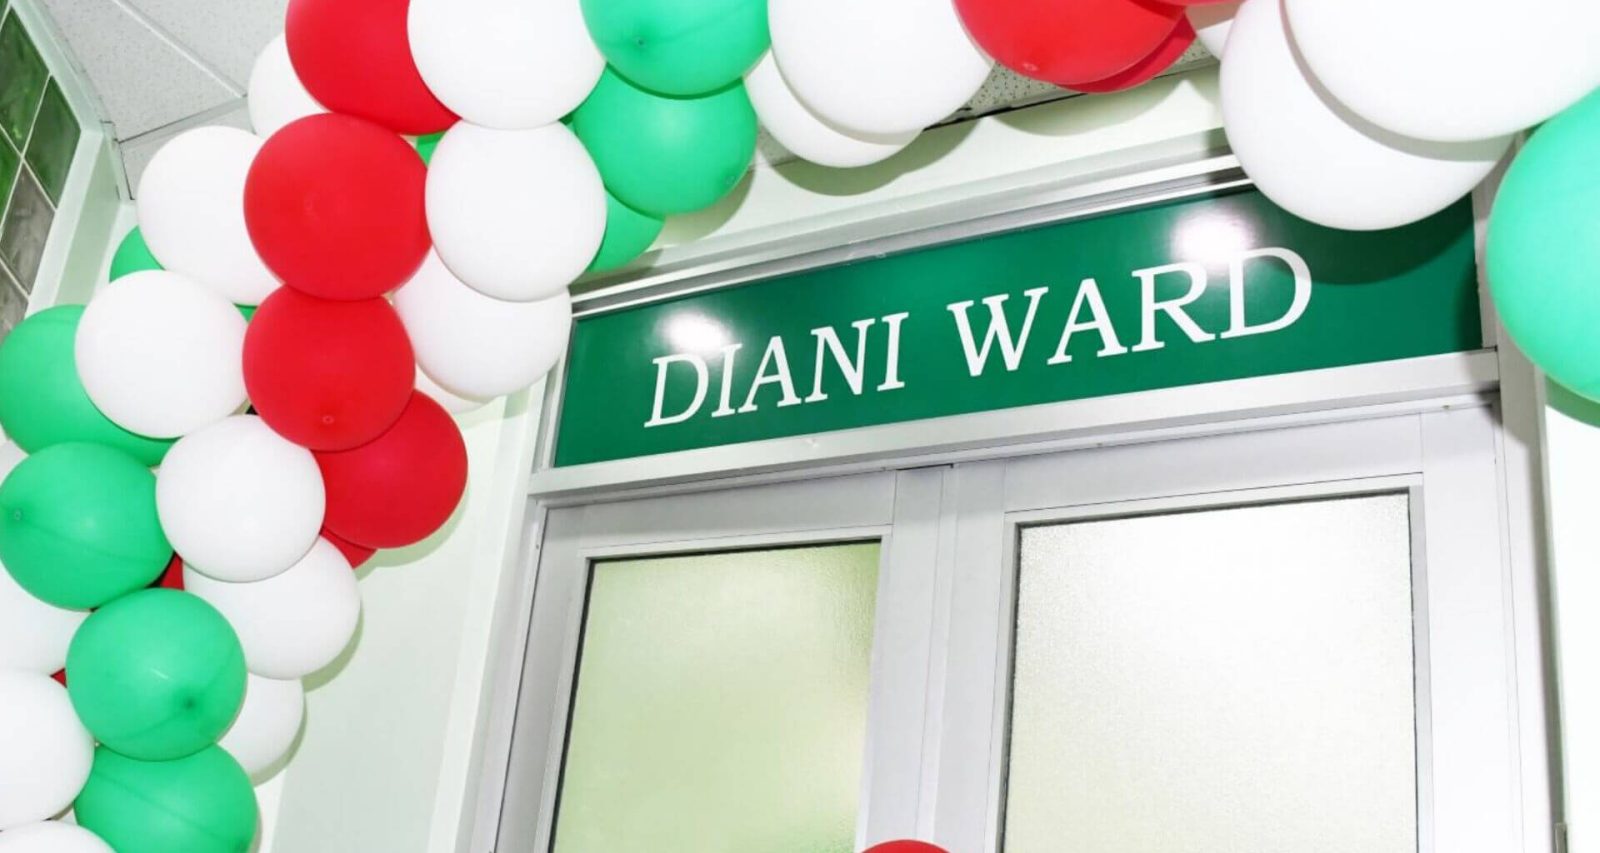 Launch of New Private Wing - Diani Ward 5th October 2022